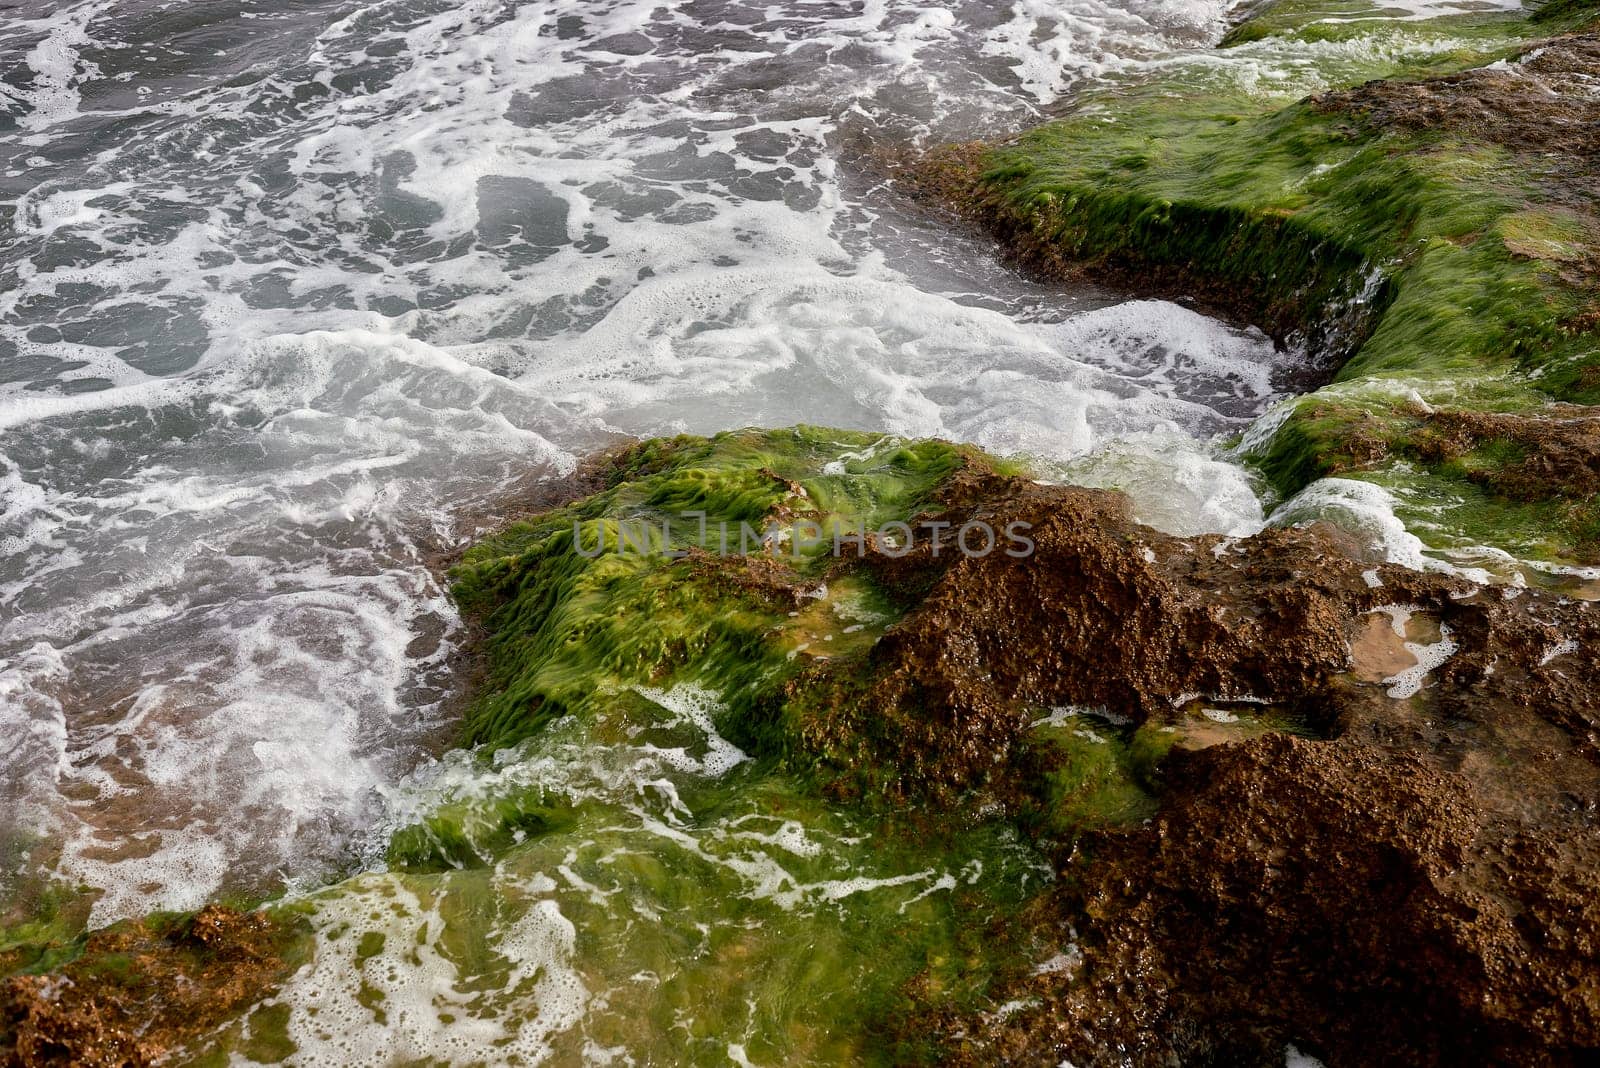 A rocky beach with seaweed and waves lapping on it by raul_ruiz